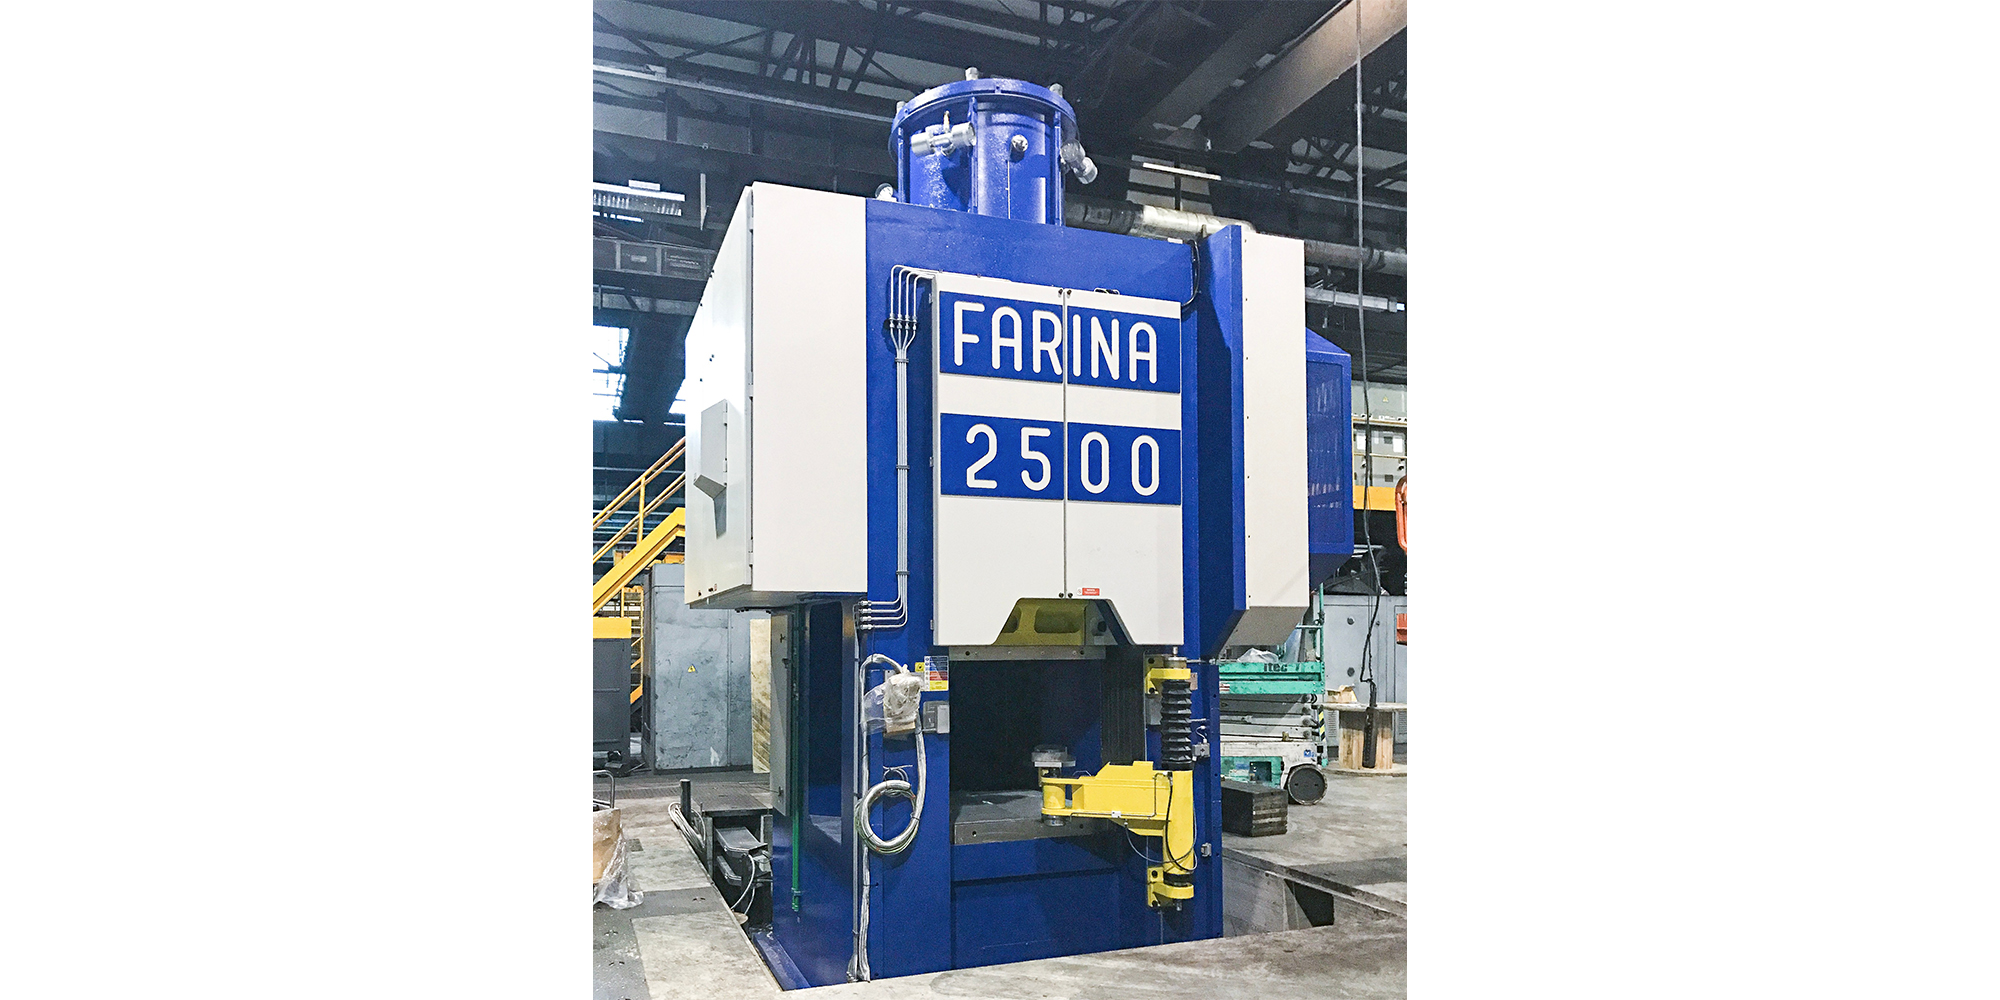 Since the 1970s, Farina Presse has designed and produced only hot forming lines. © Schuler